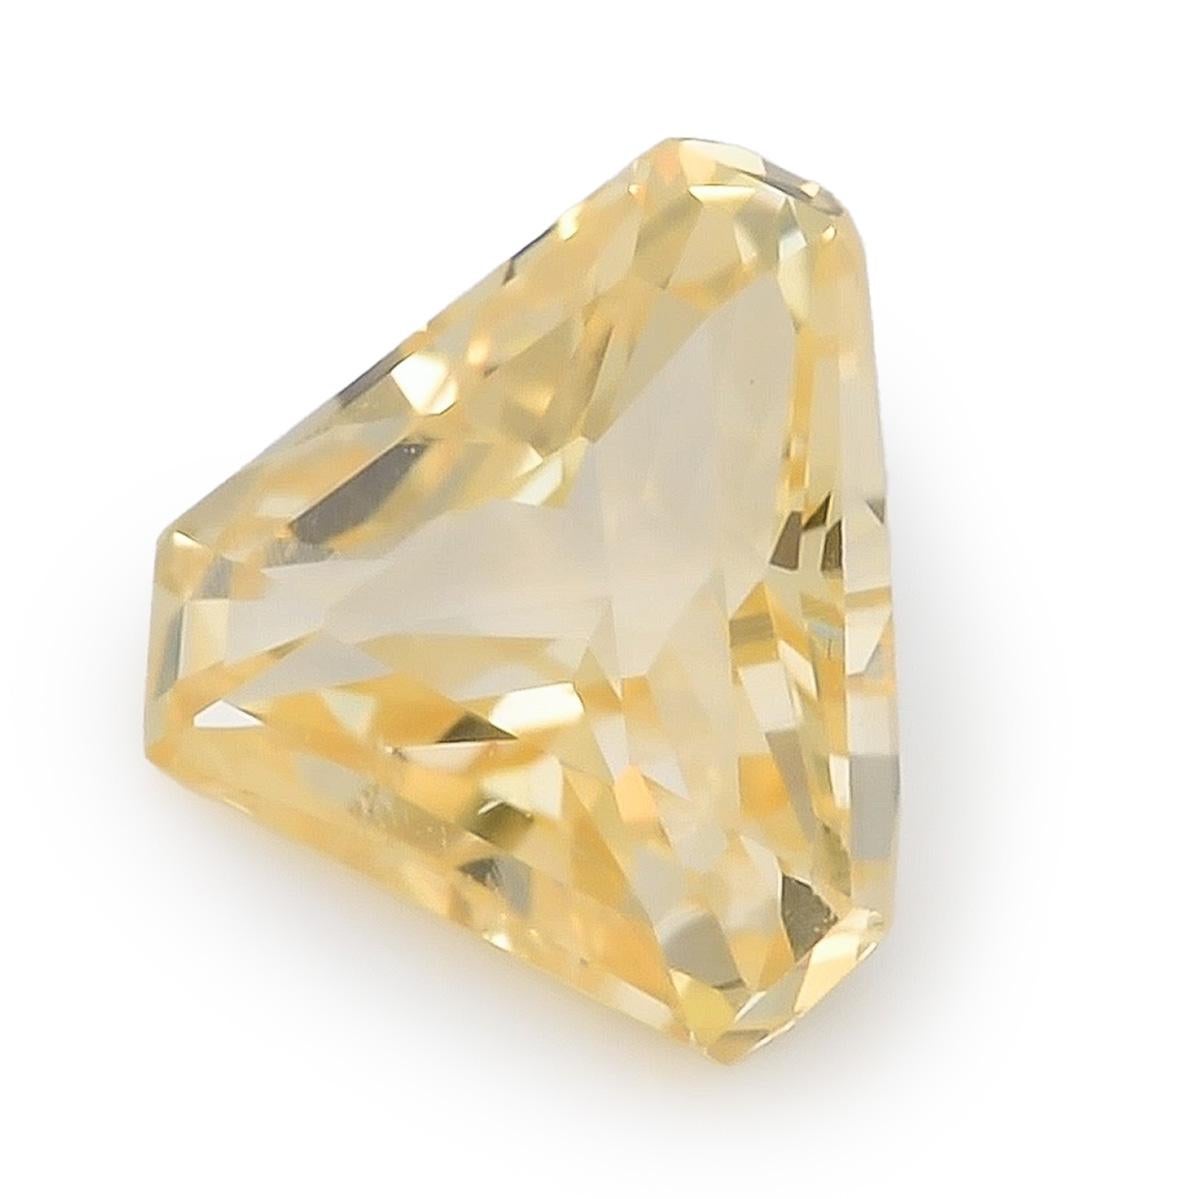 Immerse yourself in the captivating world of 2.12 carats Natural Yellow Sapphire from Sri Lanka. With its unique triangular shape measuring 7.83 x 8.18 x 4.59 mm, this gem exudes a vibrant yellow hue that radiates positivity. Its very clean clarity,